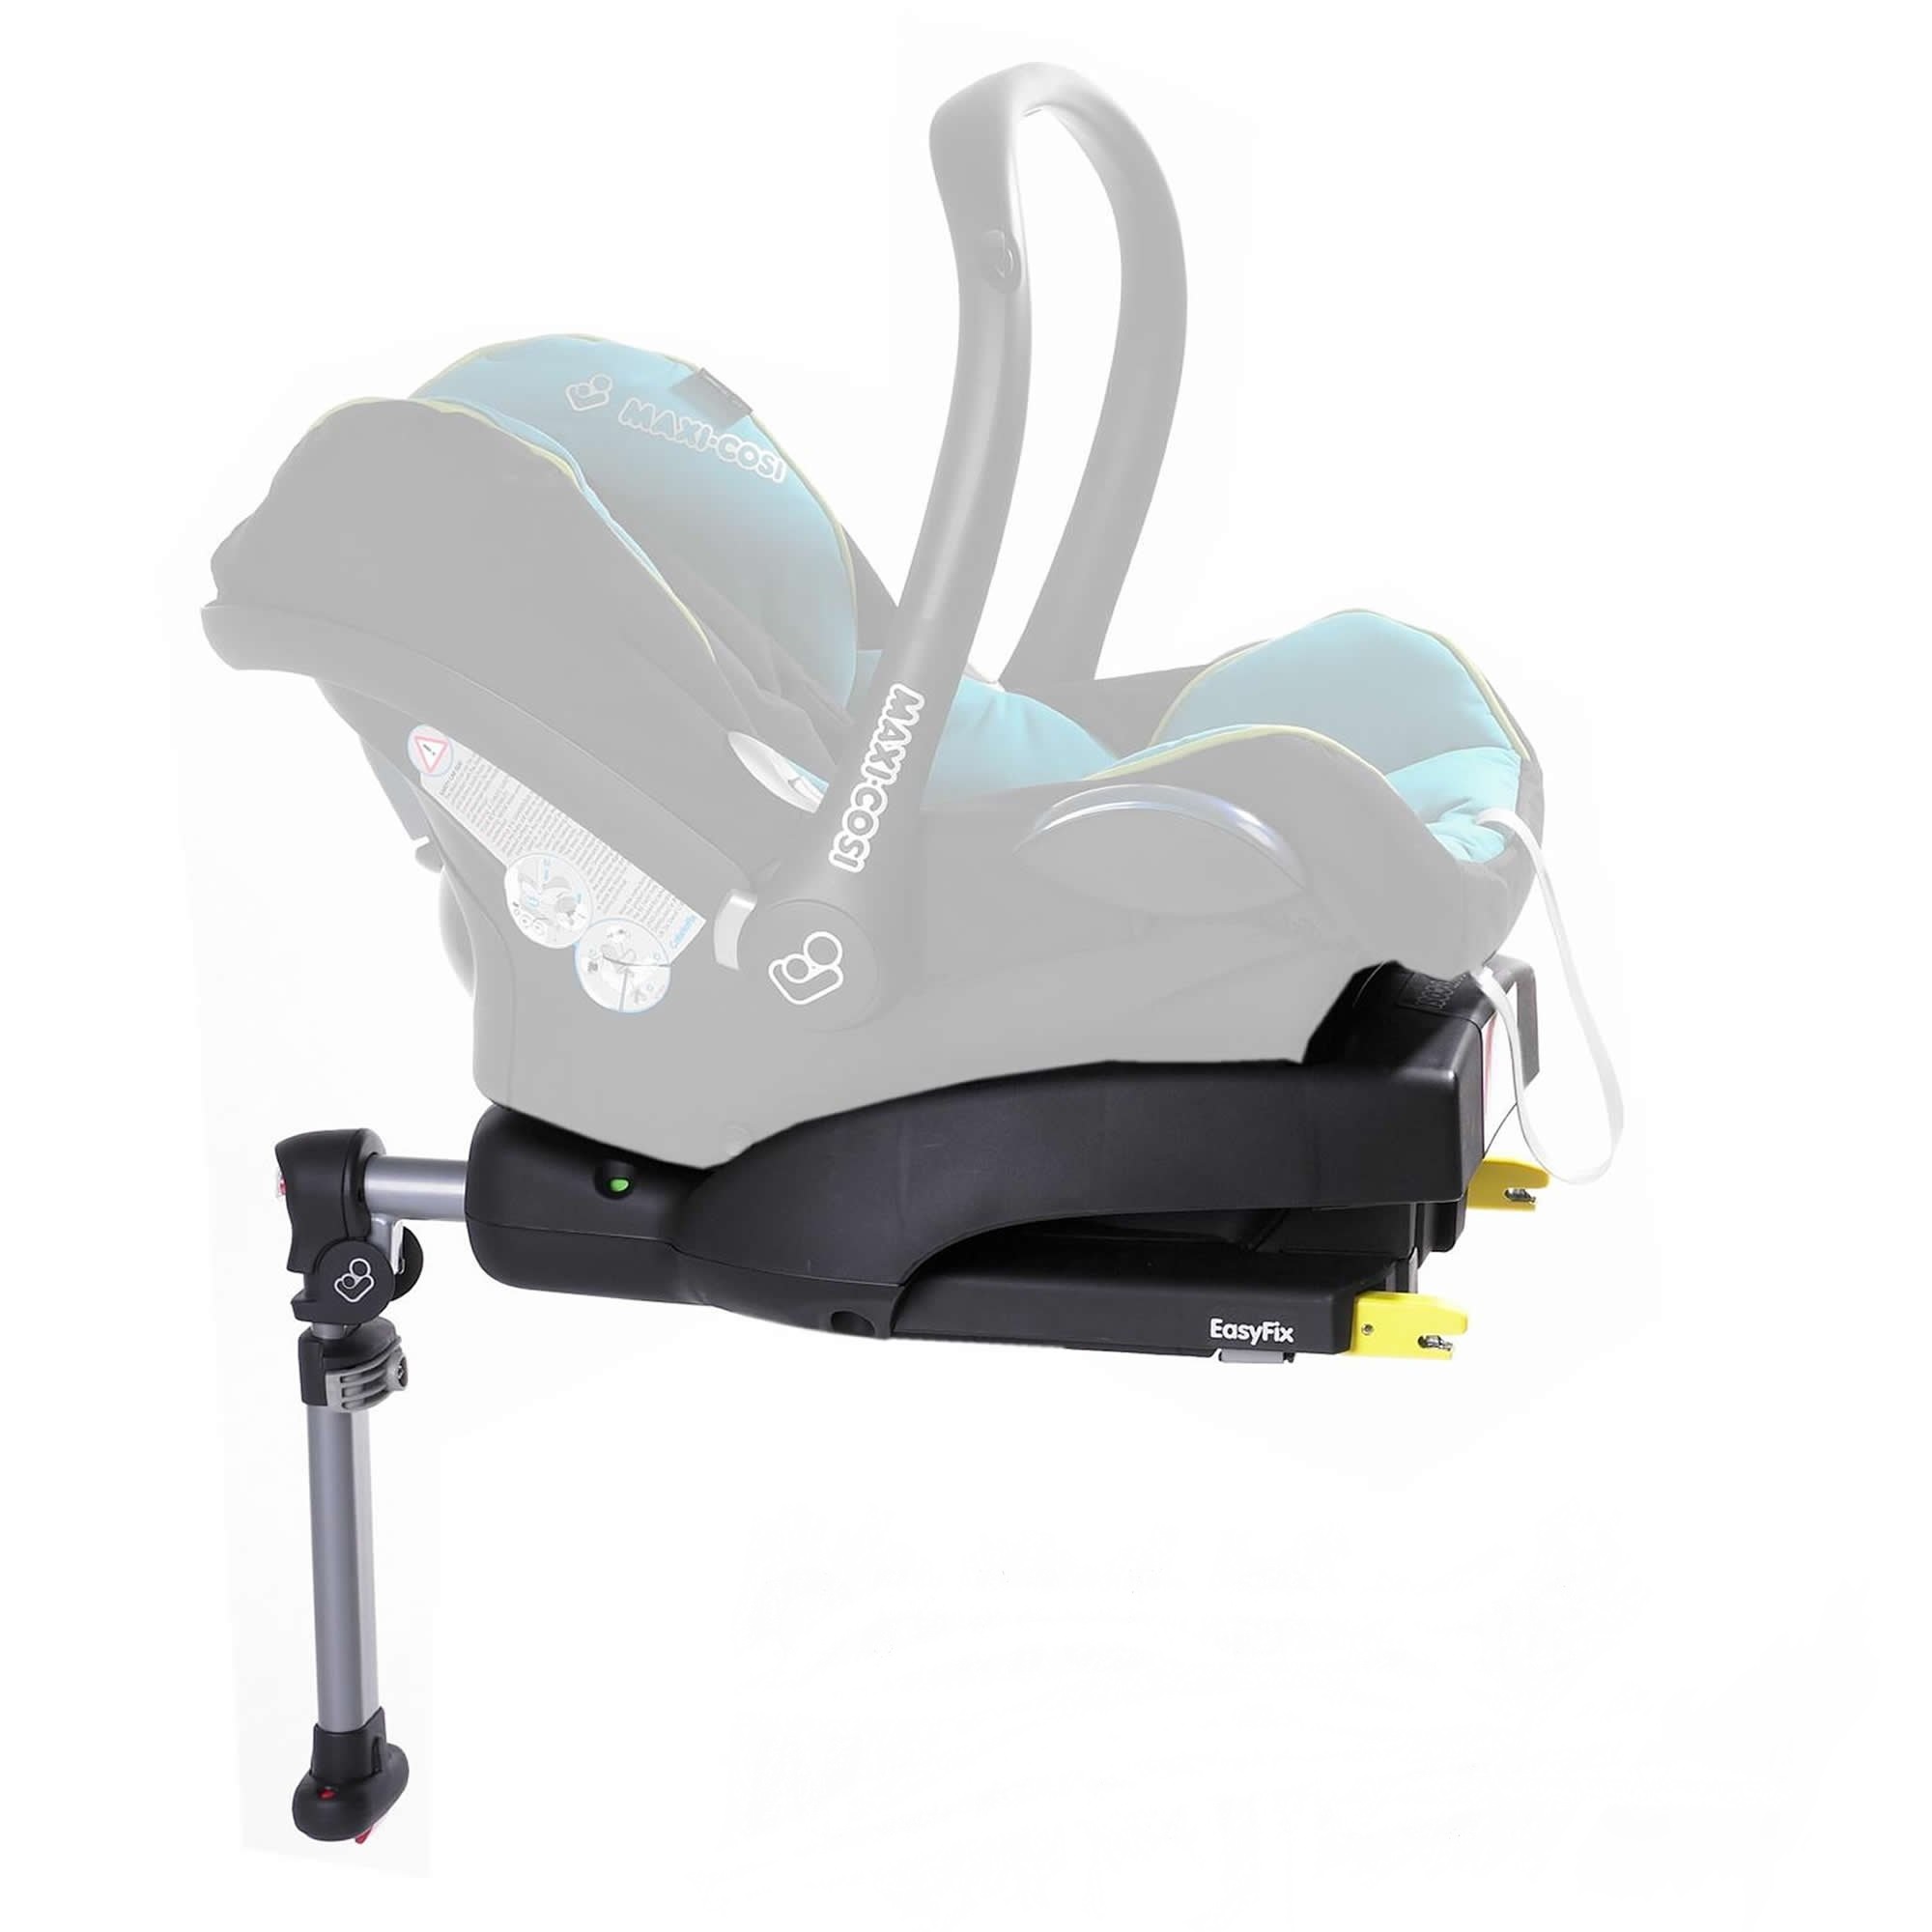 Maxi Cosi Easyfix Car Seat Base Isofix Or Belted Installation For Cabriofix Suitable From Birth 0 12 M 13 Kg Mamours - Maxi Cosi Easyfix Car Seat Base Instructions